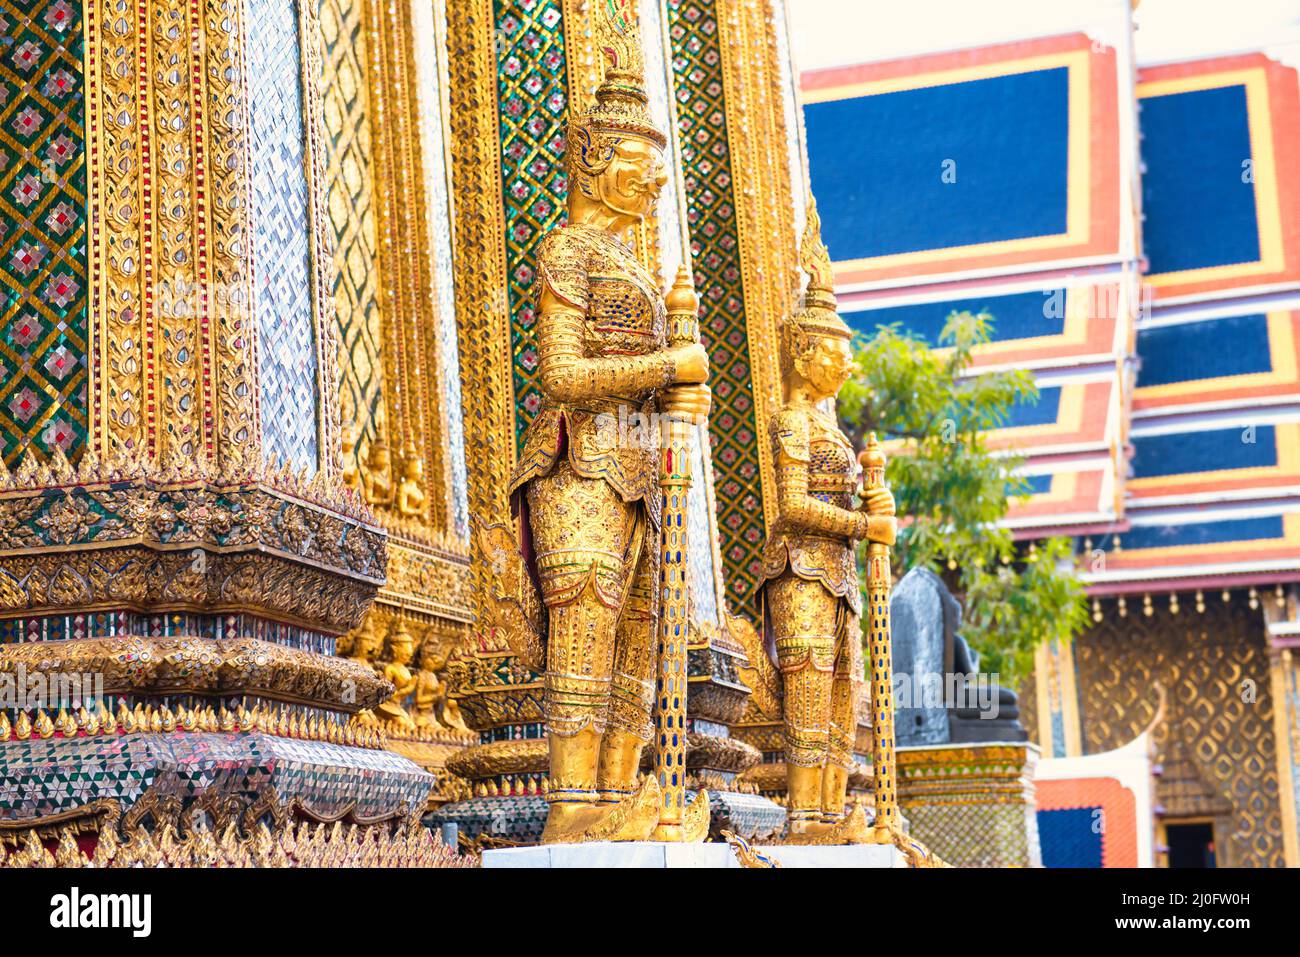 Gold statues at entrance to Temple of Emerald Buddha in Bangkok Stock Photo